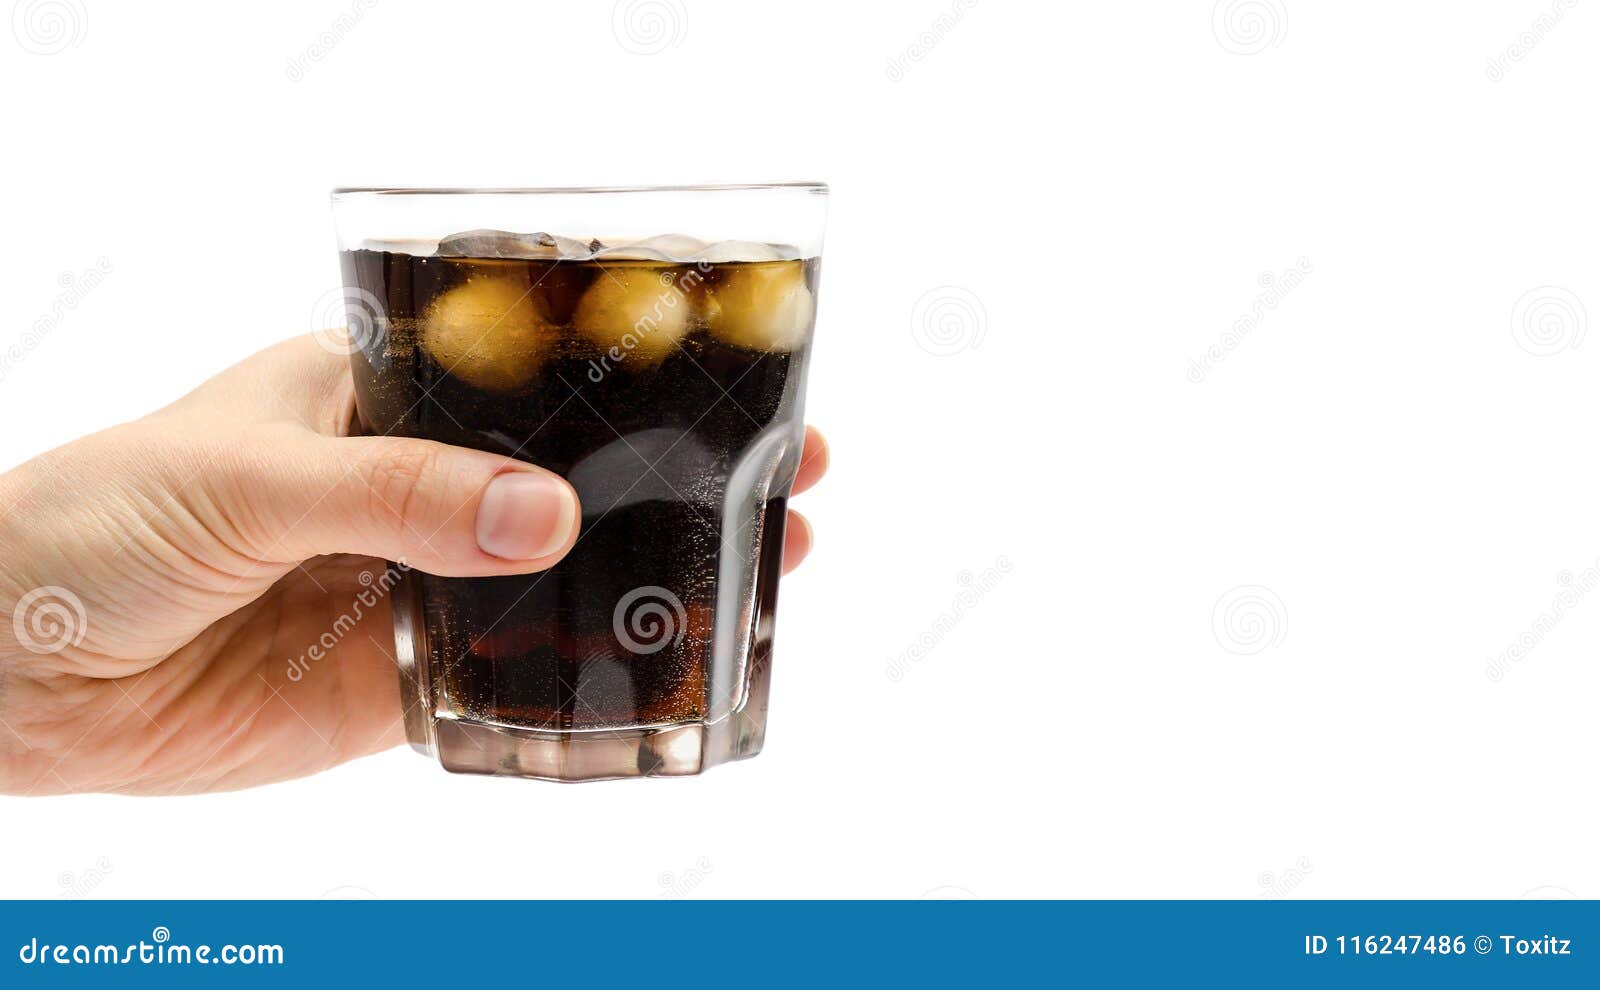 https://thumbs.dreamstime.com/z/hand-girl-holding-glass-rum-coke-isolated-white-background-copy-space-template-hand-girl-holding-glass-rum-116247486.jpg